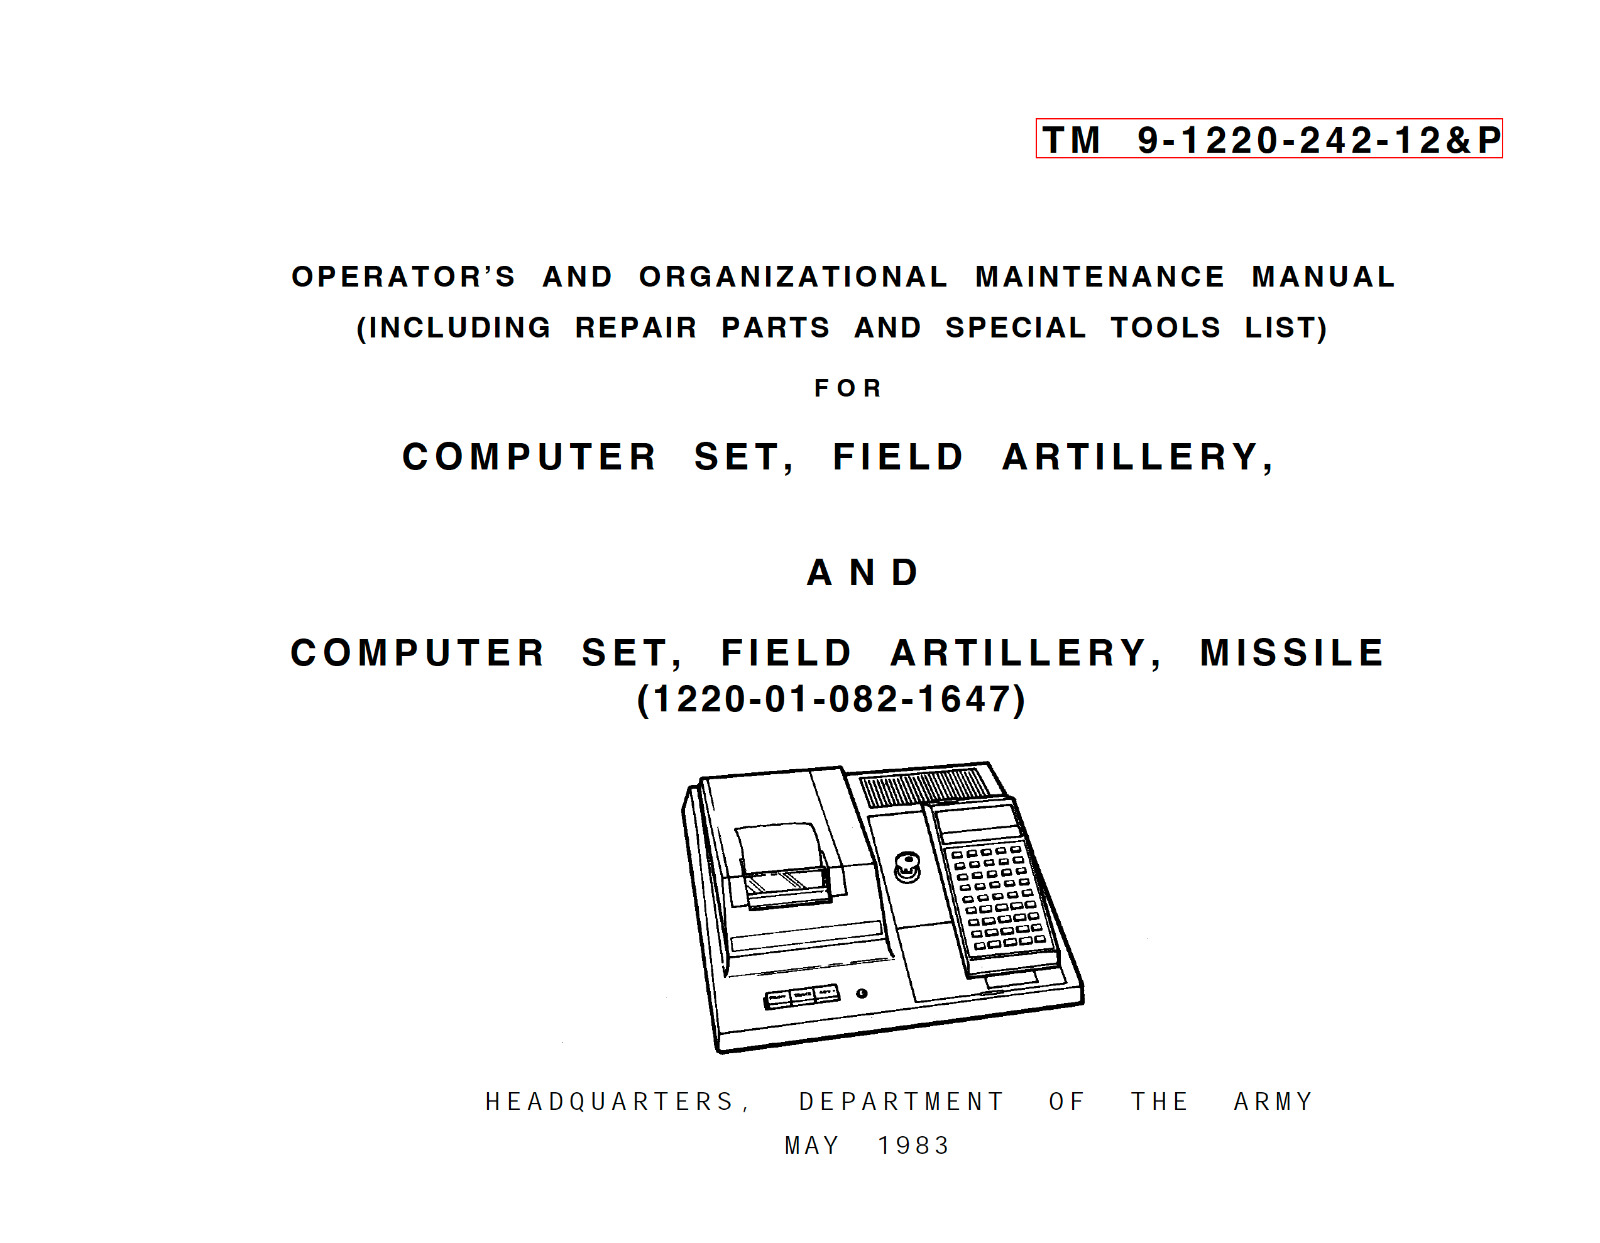 157 Page TM 9-1220-242-12&P COMPUTER SET FIELD ARTILLERY MISSILE On Data CD